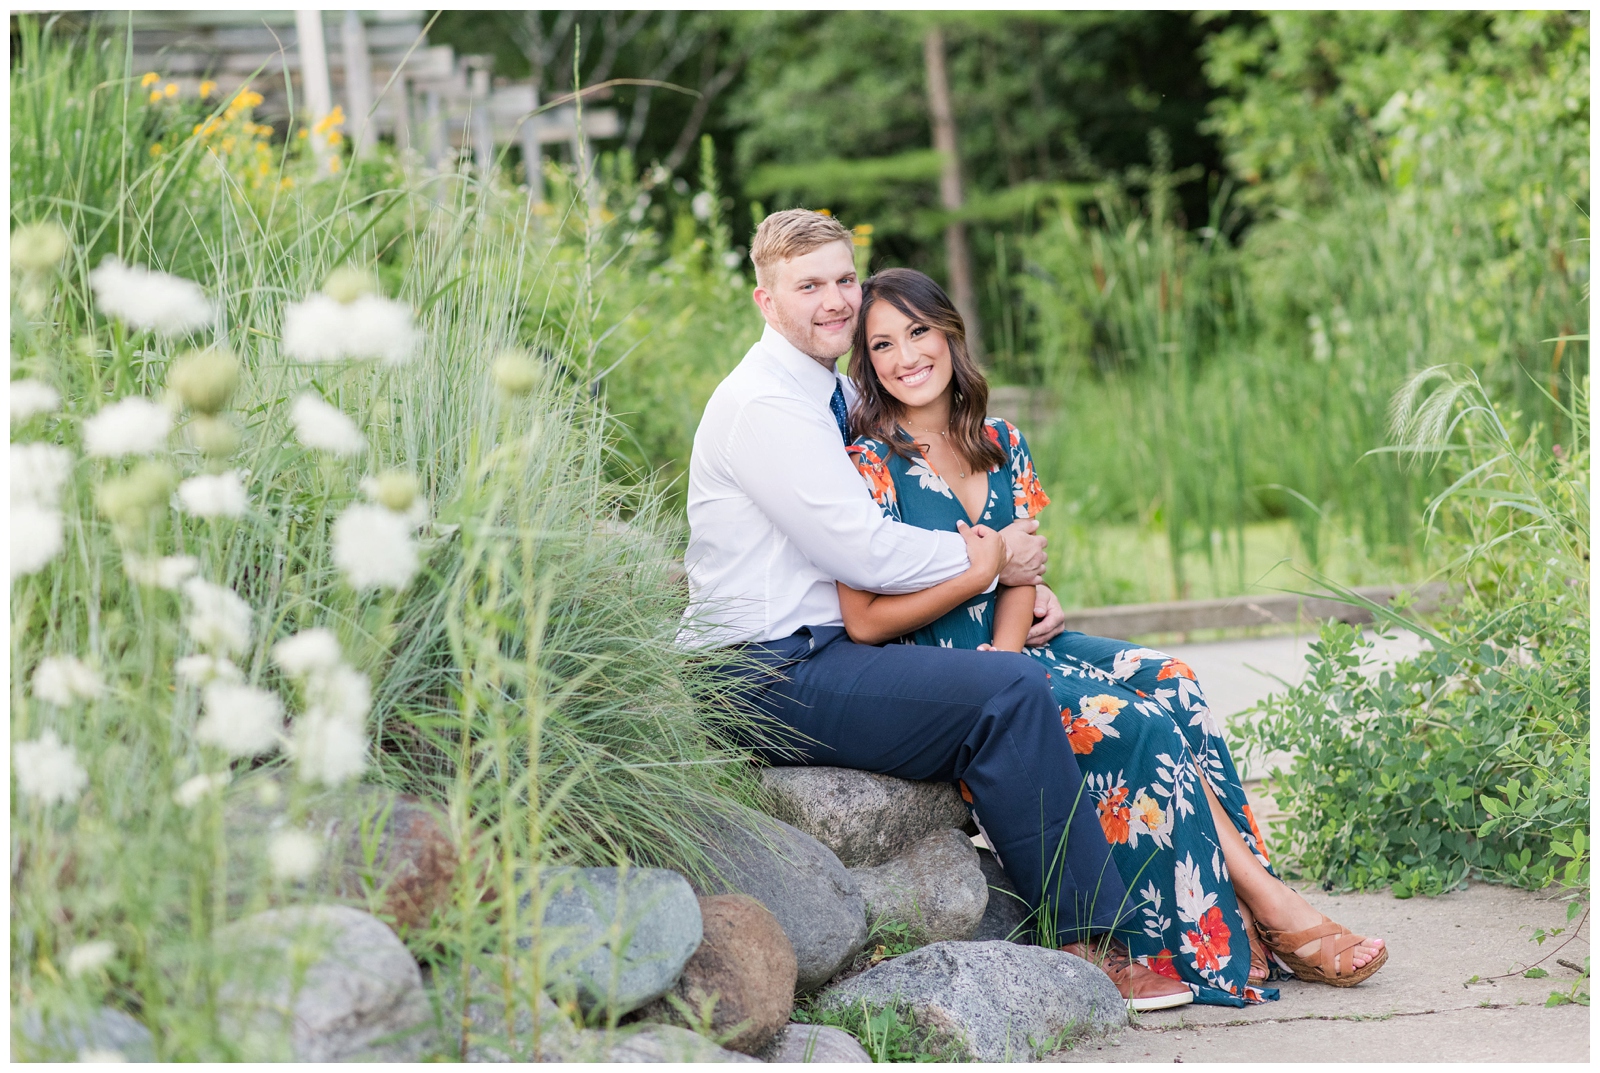 engaged couple happily smiling at the camera in their formal wear while sitting on a rock surrounding by green and white greenery and flowers in a garden during a summer evening 